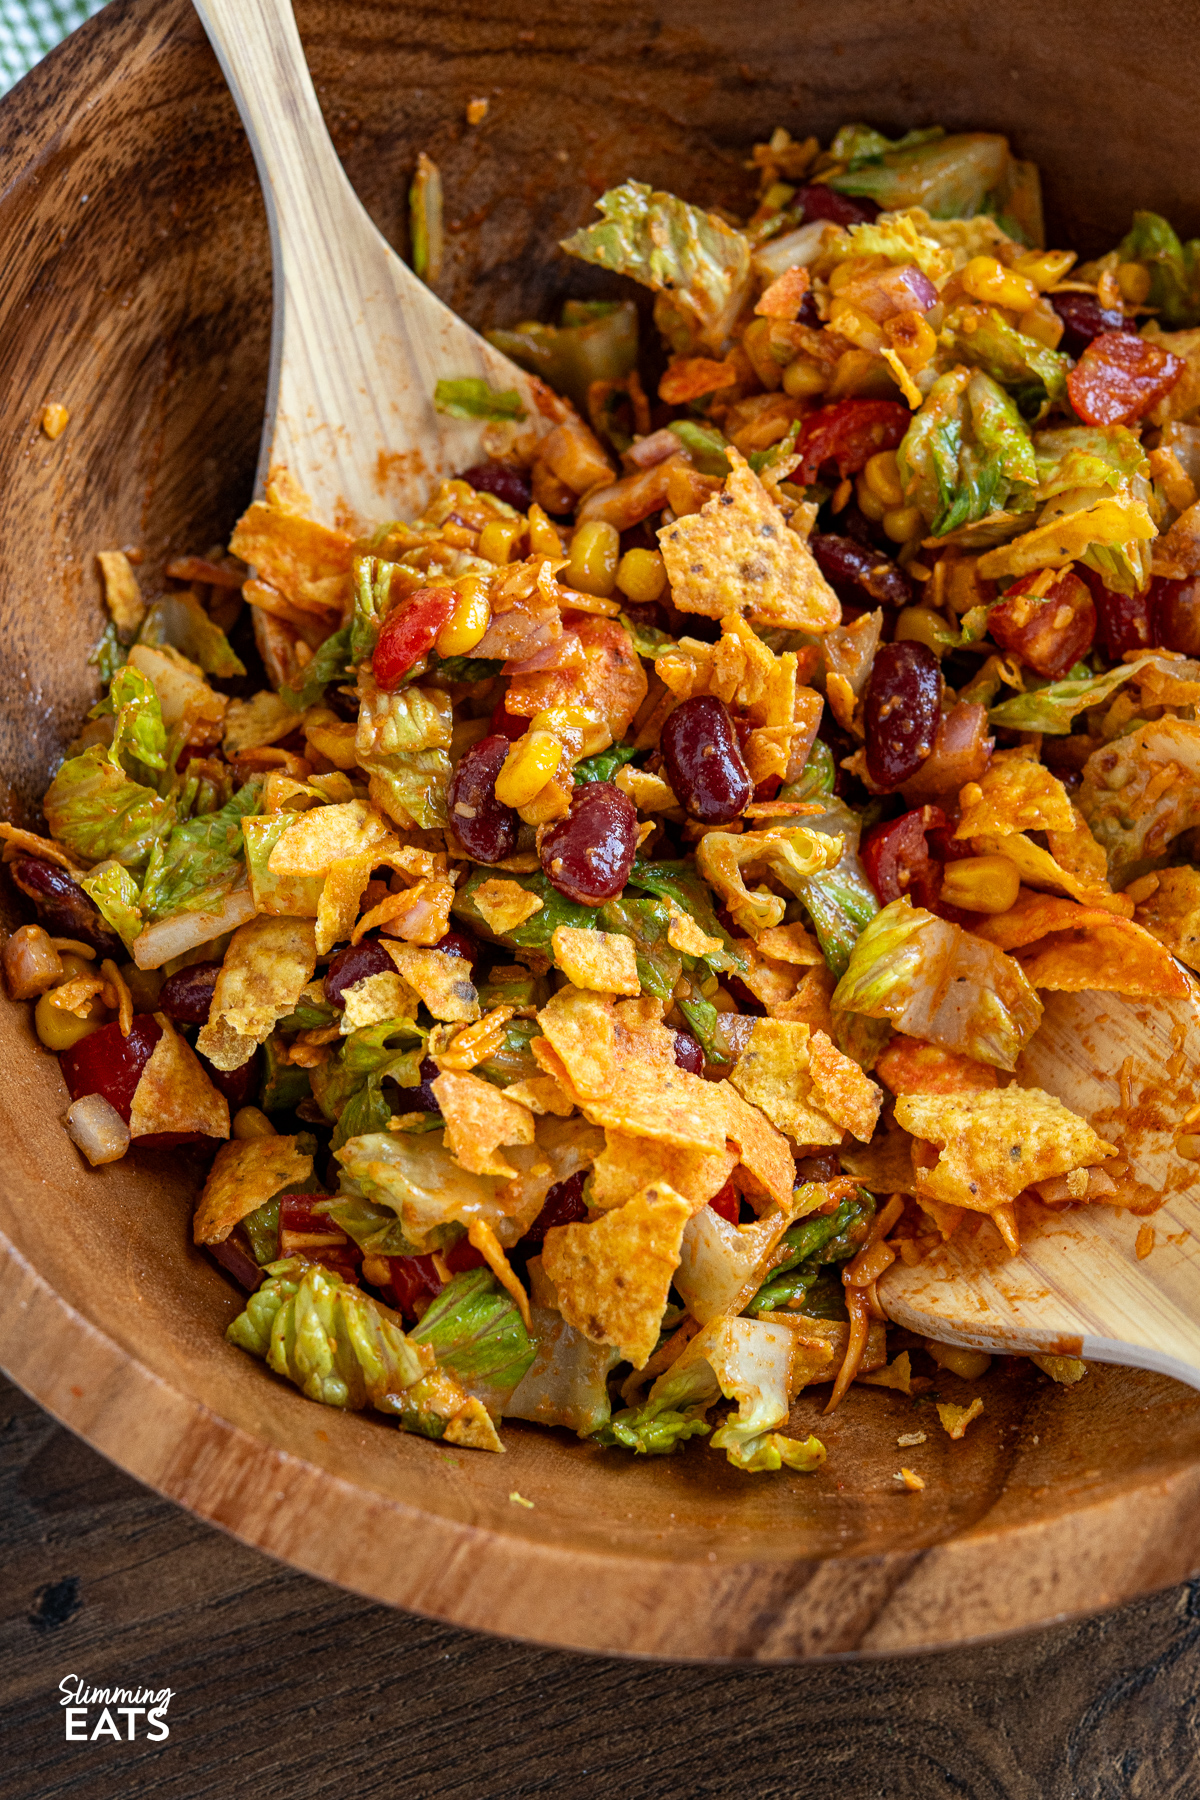 In a rustic wooden bowl, the Dorito Taco Salad is fully mixed, showcasing its vibrant colors and enticing aroma, inviting you to indulge with the aid of salad spoons.